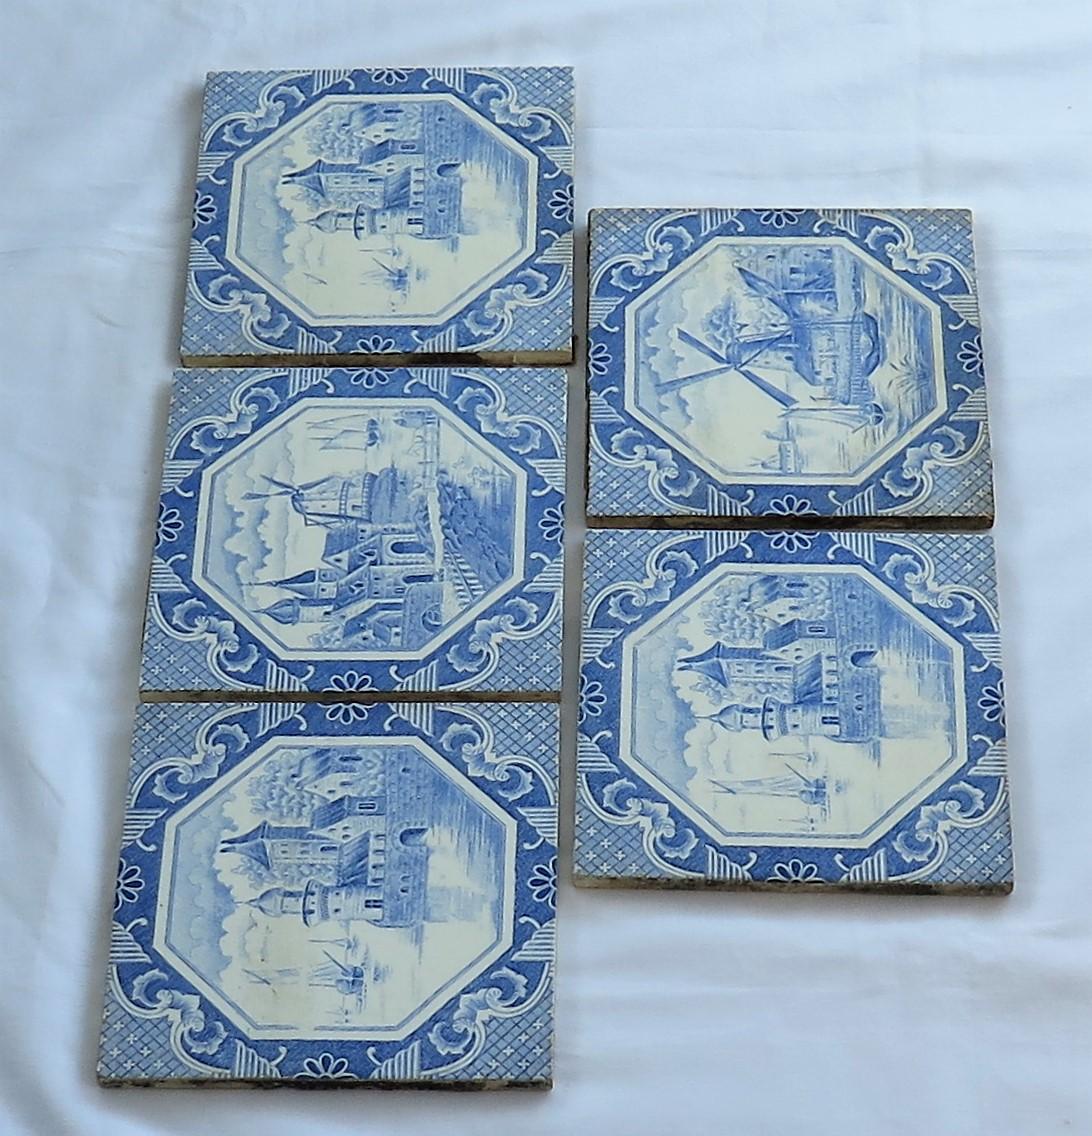 These are a good set of five glazed ceramic Delft style wall tiles, all with a blue and white waterside theme, manufactured in Belgium and dating to the early 20th century, circa 1920s. 

Each tile is nominally 6 inches square. The tiles are in